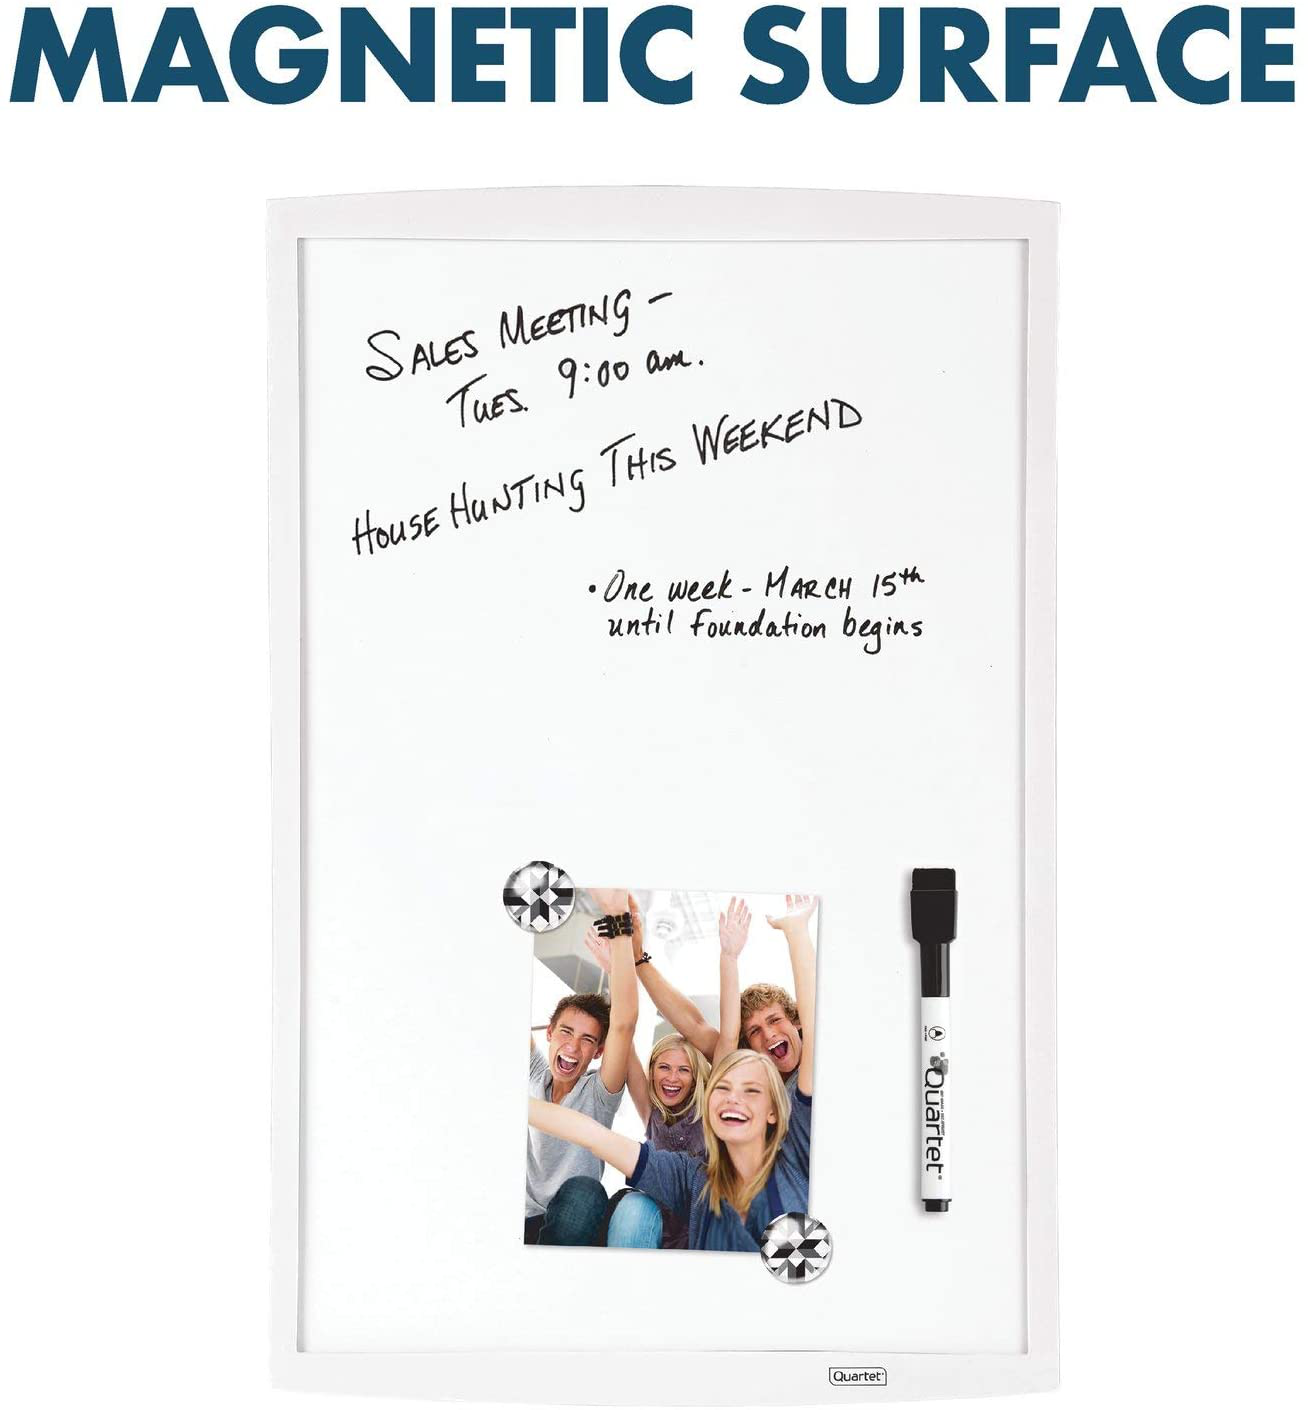 Quartet Magnetic Whiteboard, 11" x 14", Small White Board, Dry Erase Board for Kids, Home School Supplies or Home Office Decor, White Plastic Frame, Includes 1 Dry Erase Marker & 2 Magnets (63536)